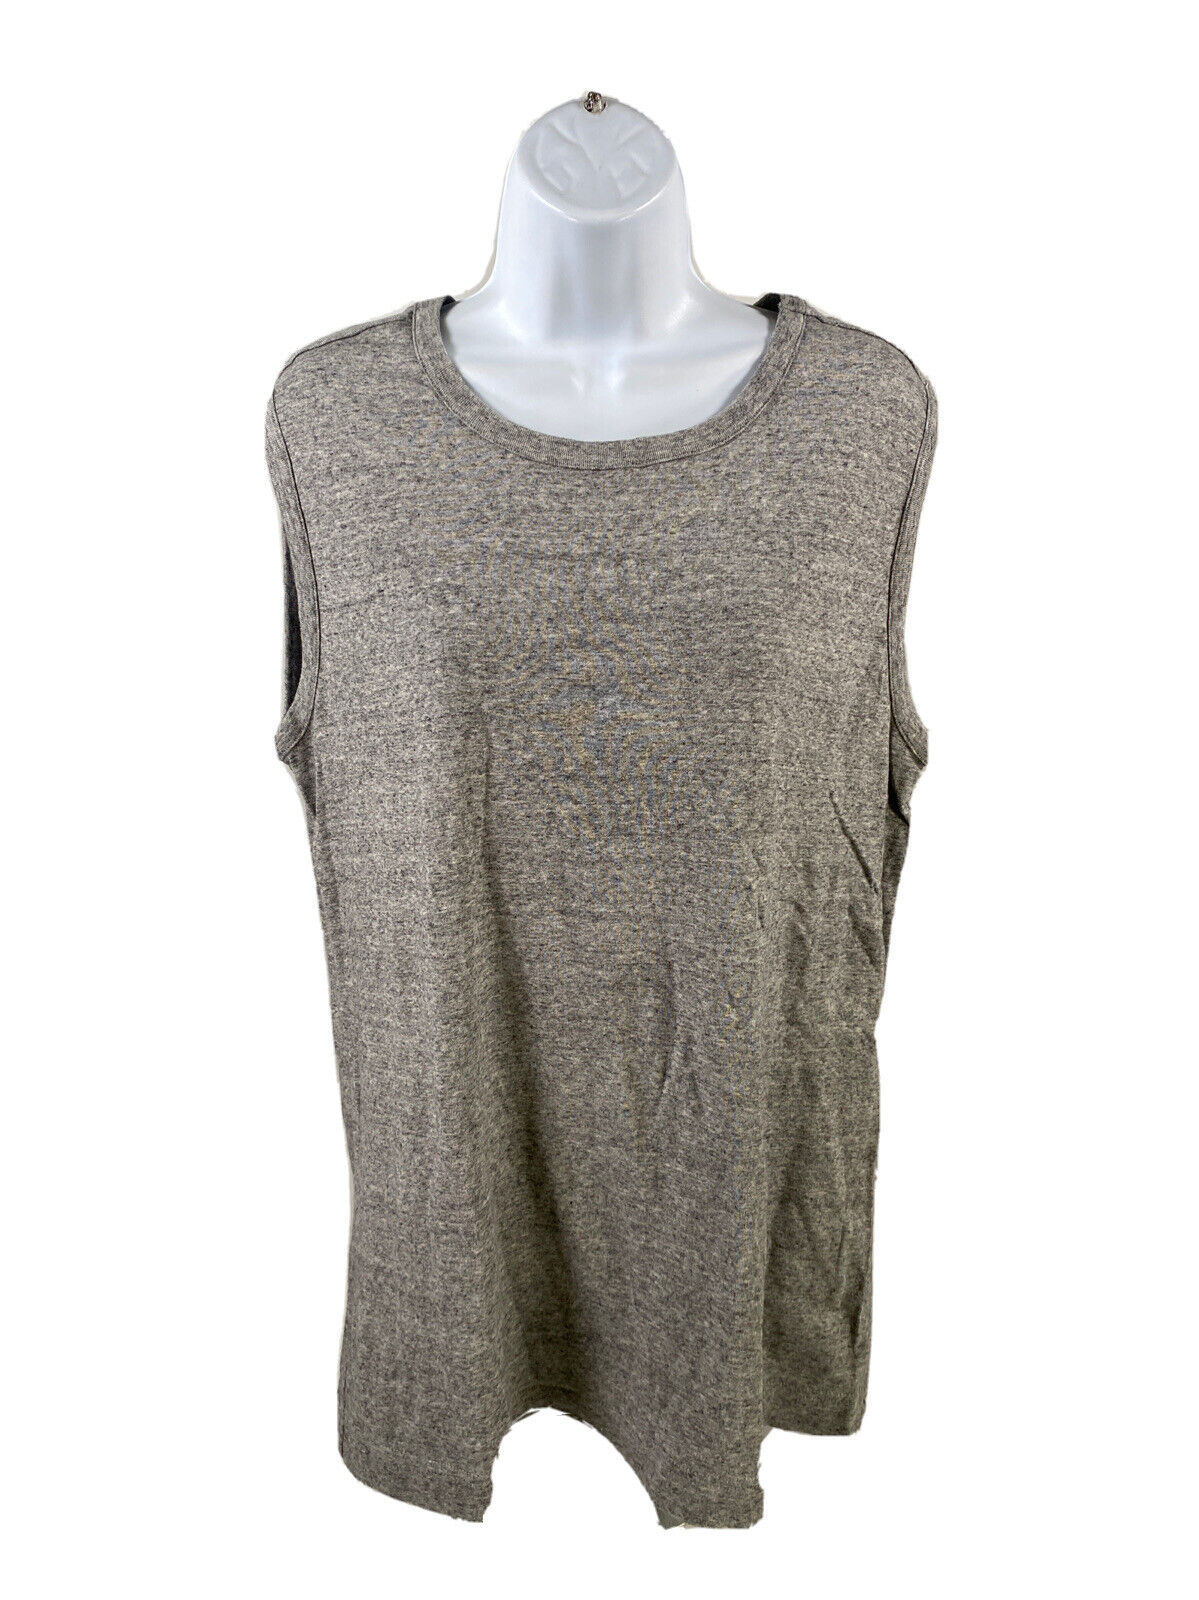 Duluth Trading Co Women's Gray 100% Cotton Tank Top - L – The